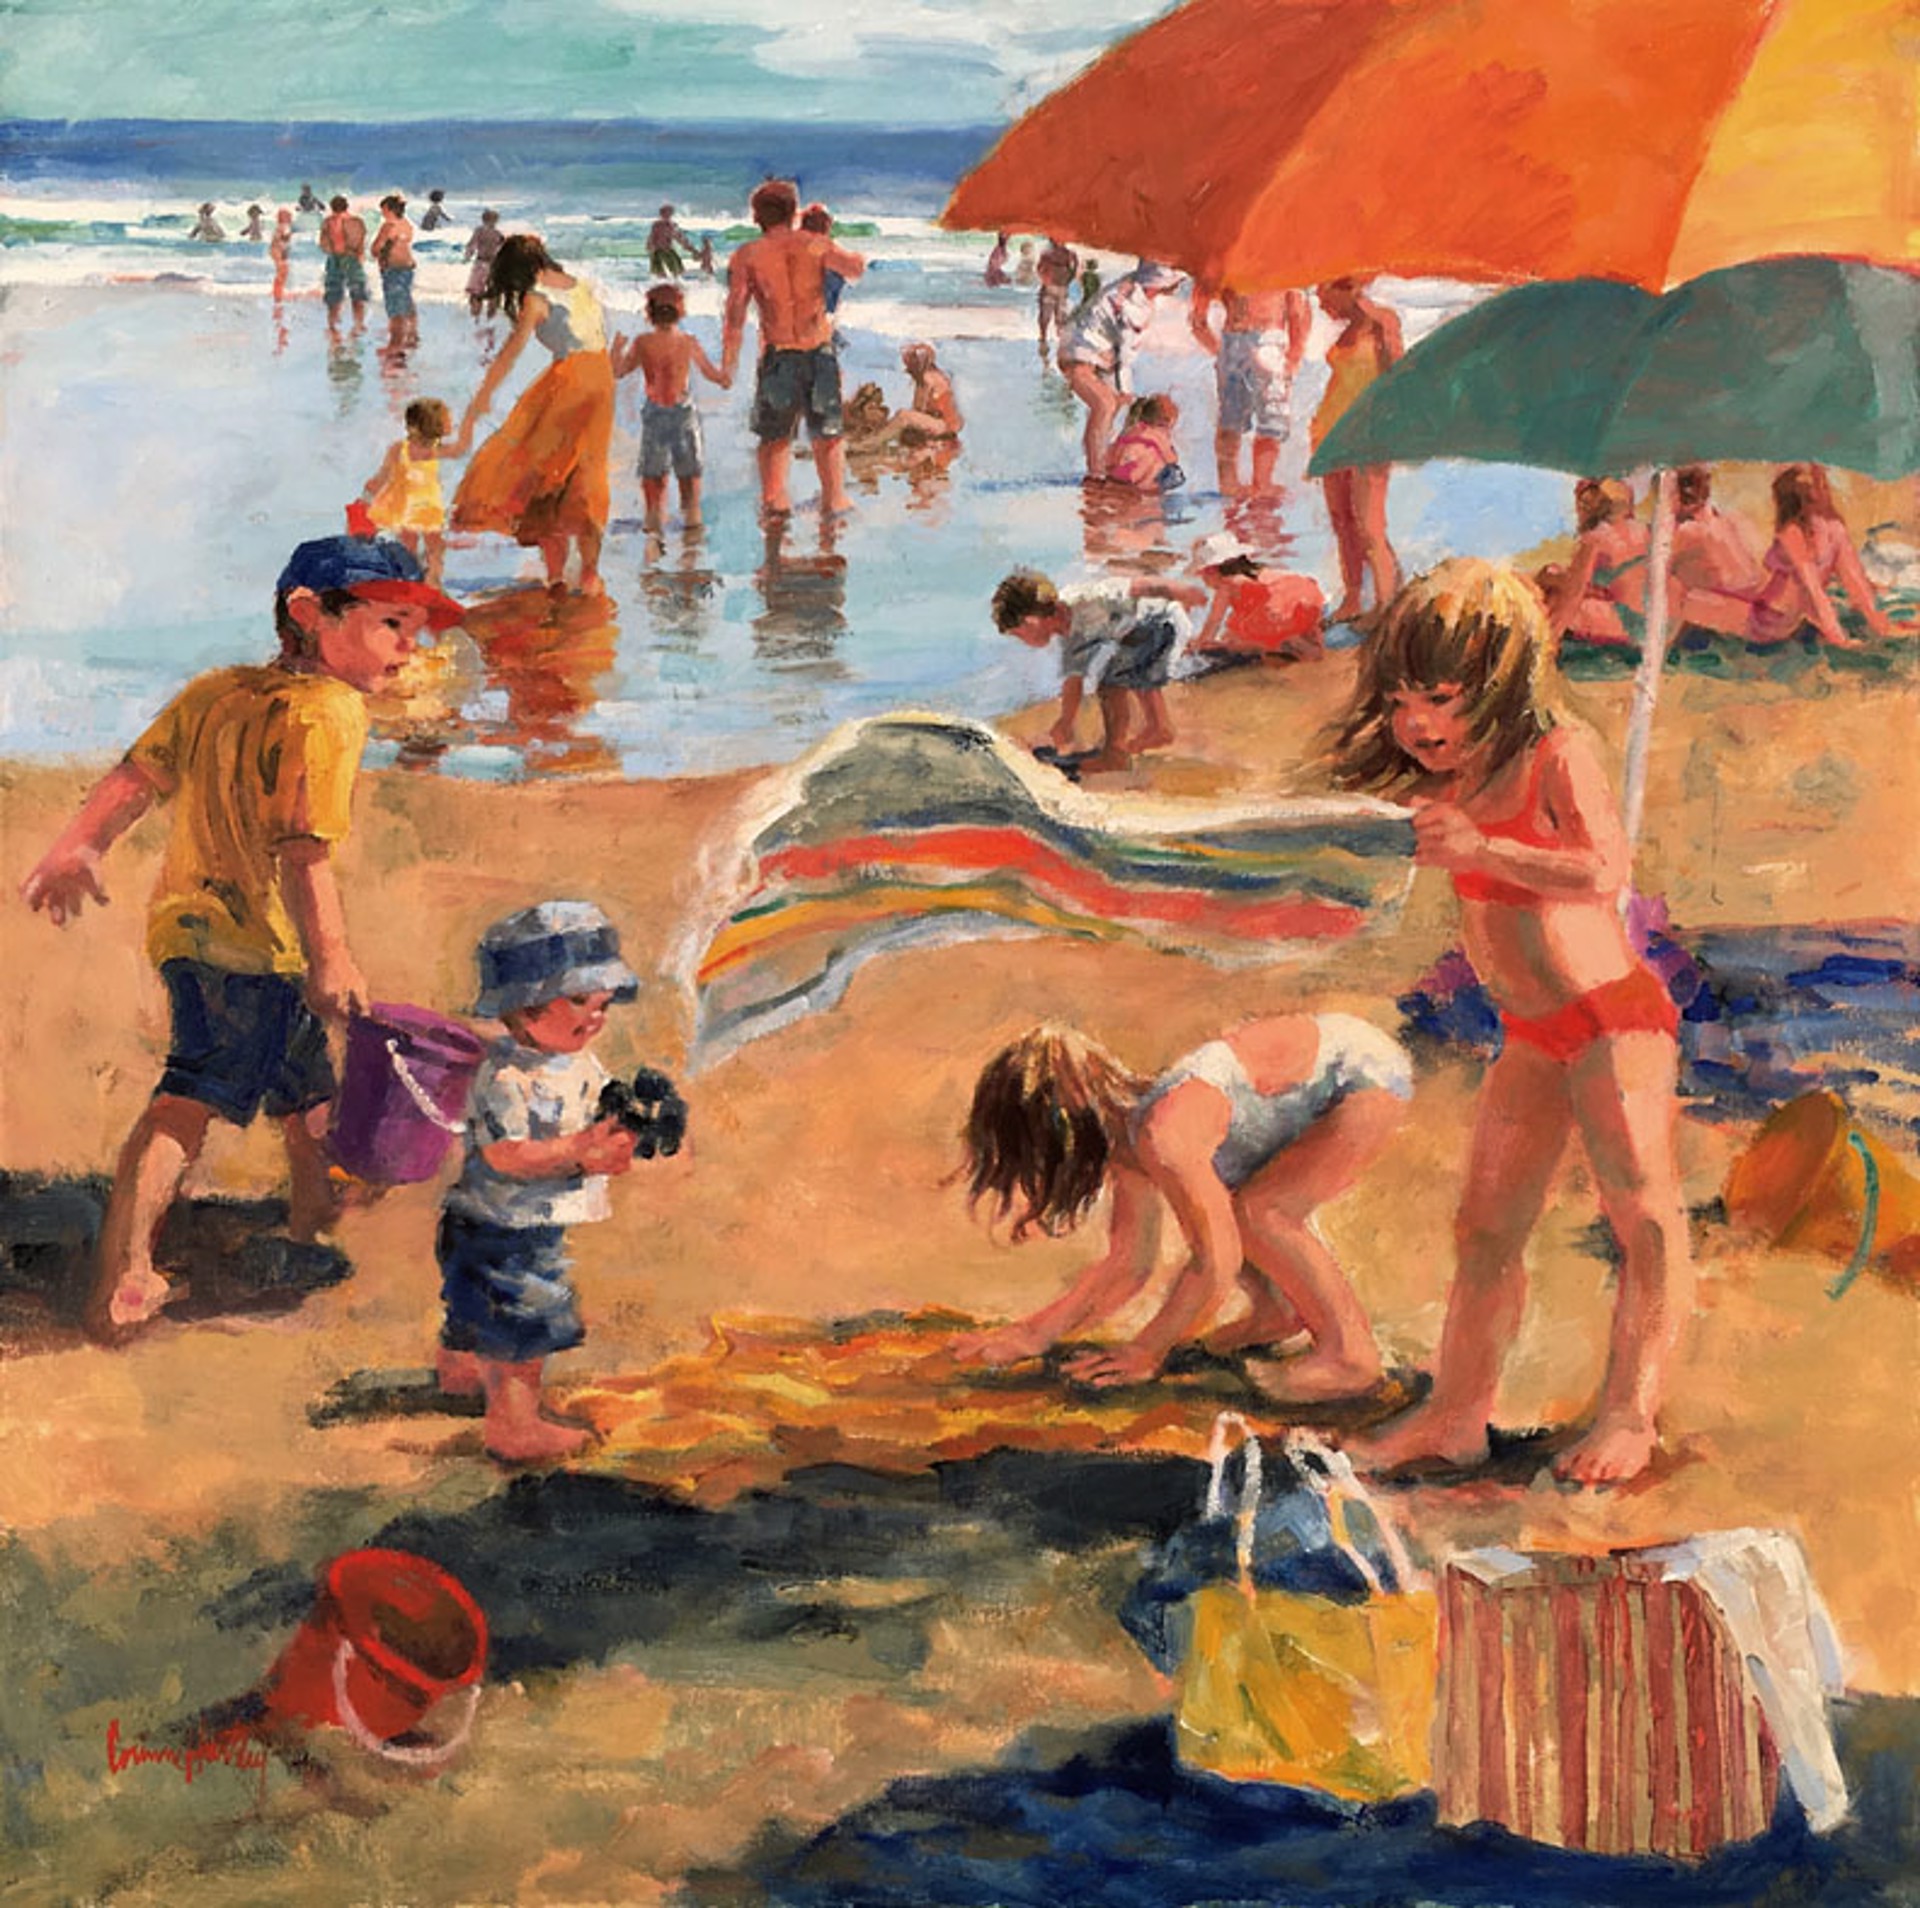 Family Beach Day by Corinne Hartley